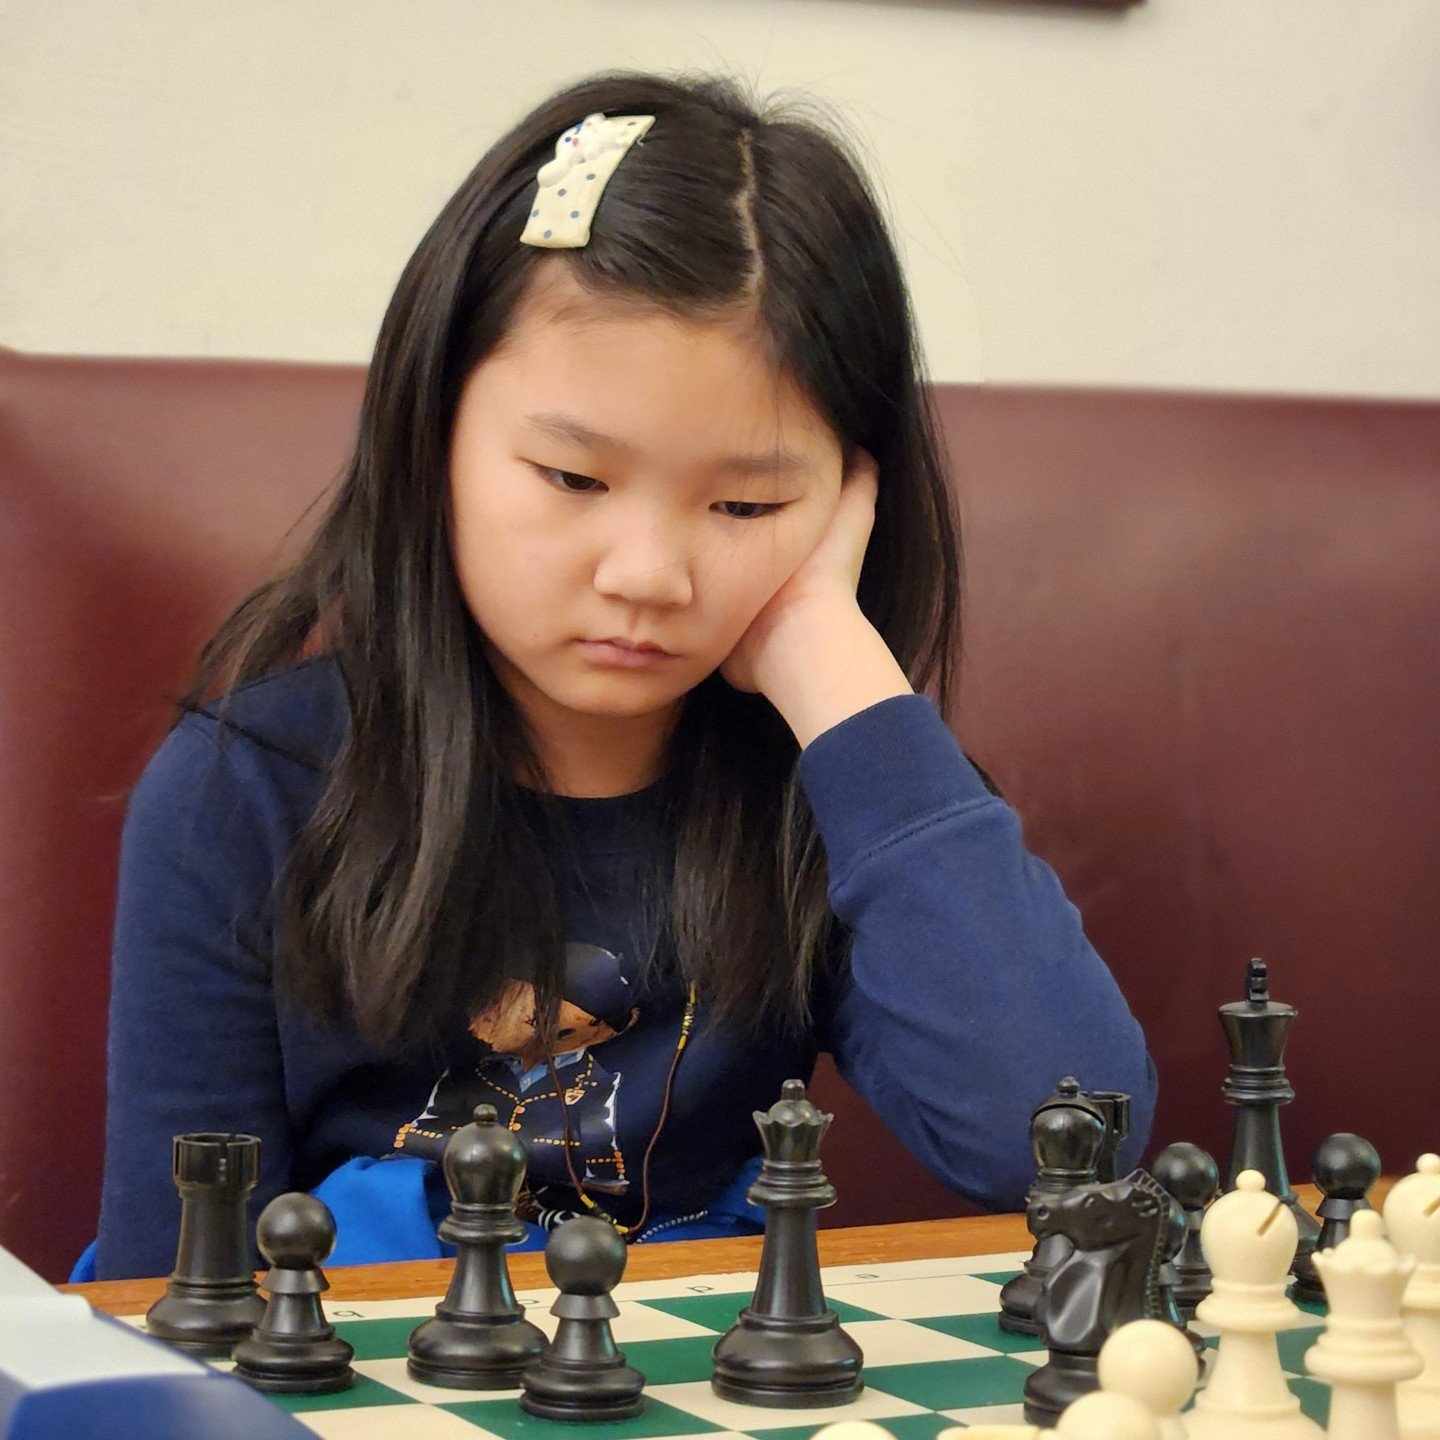 Under-10 Girls National Co-Champion Scarlett &quot;Queen&quot; Kong is in the house.

#EliteCamp